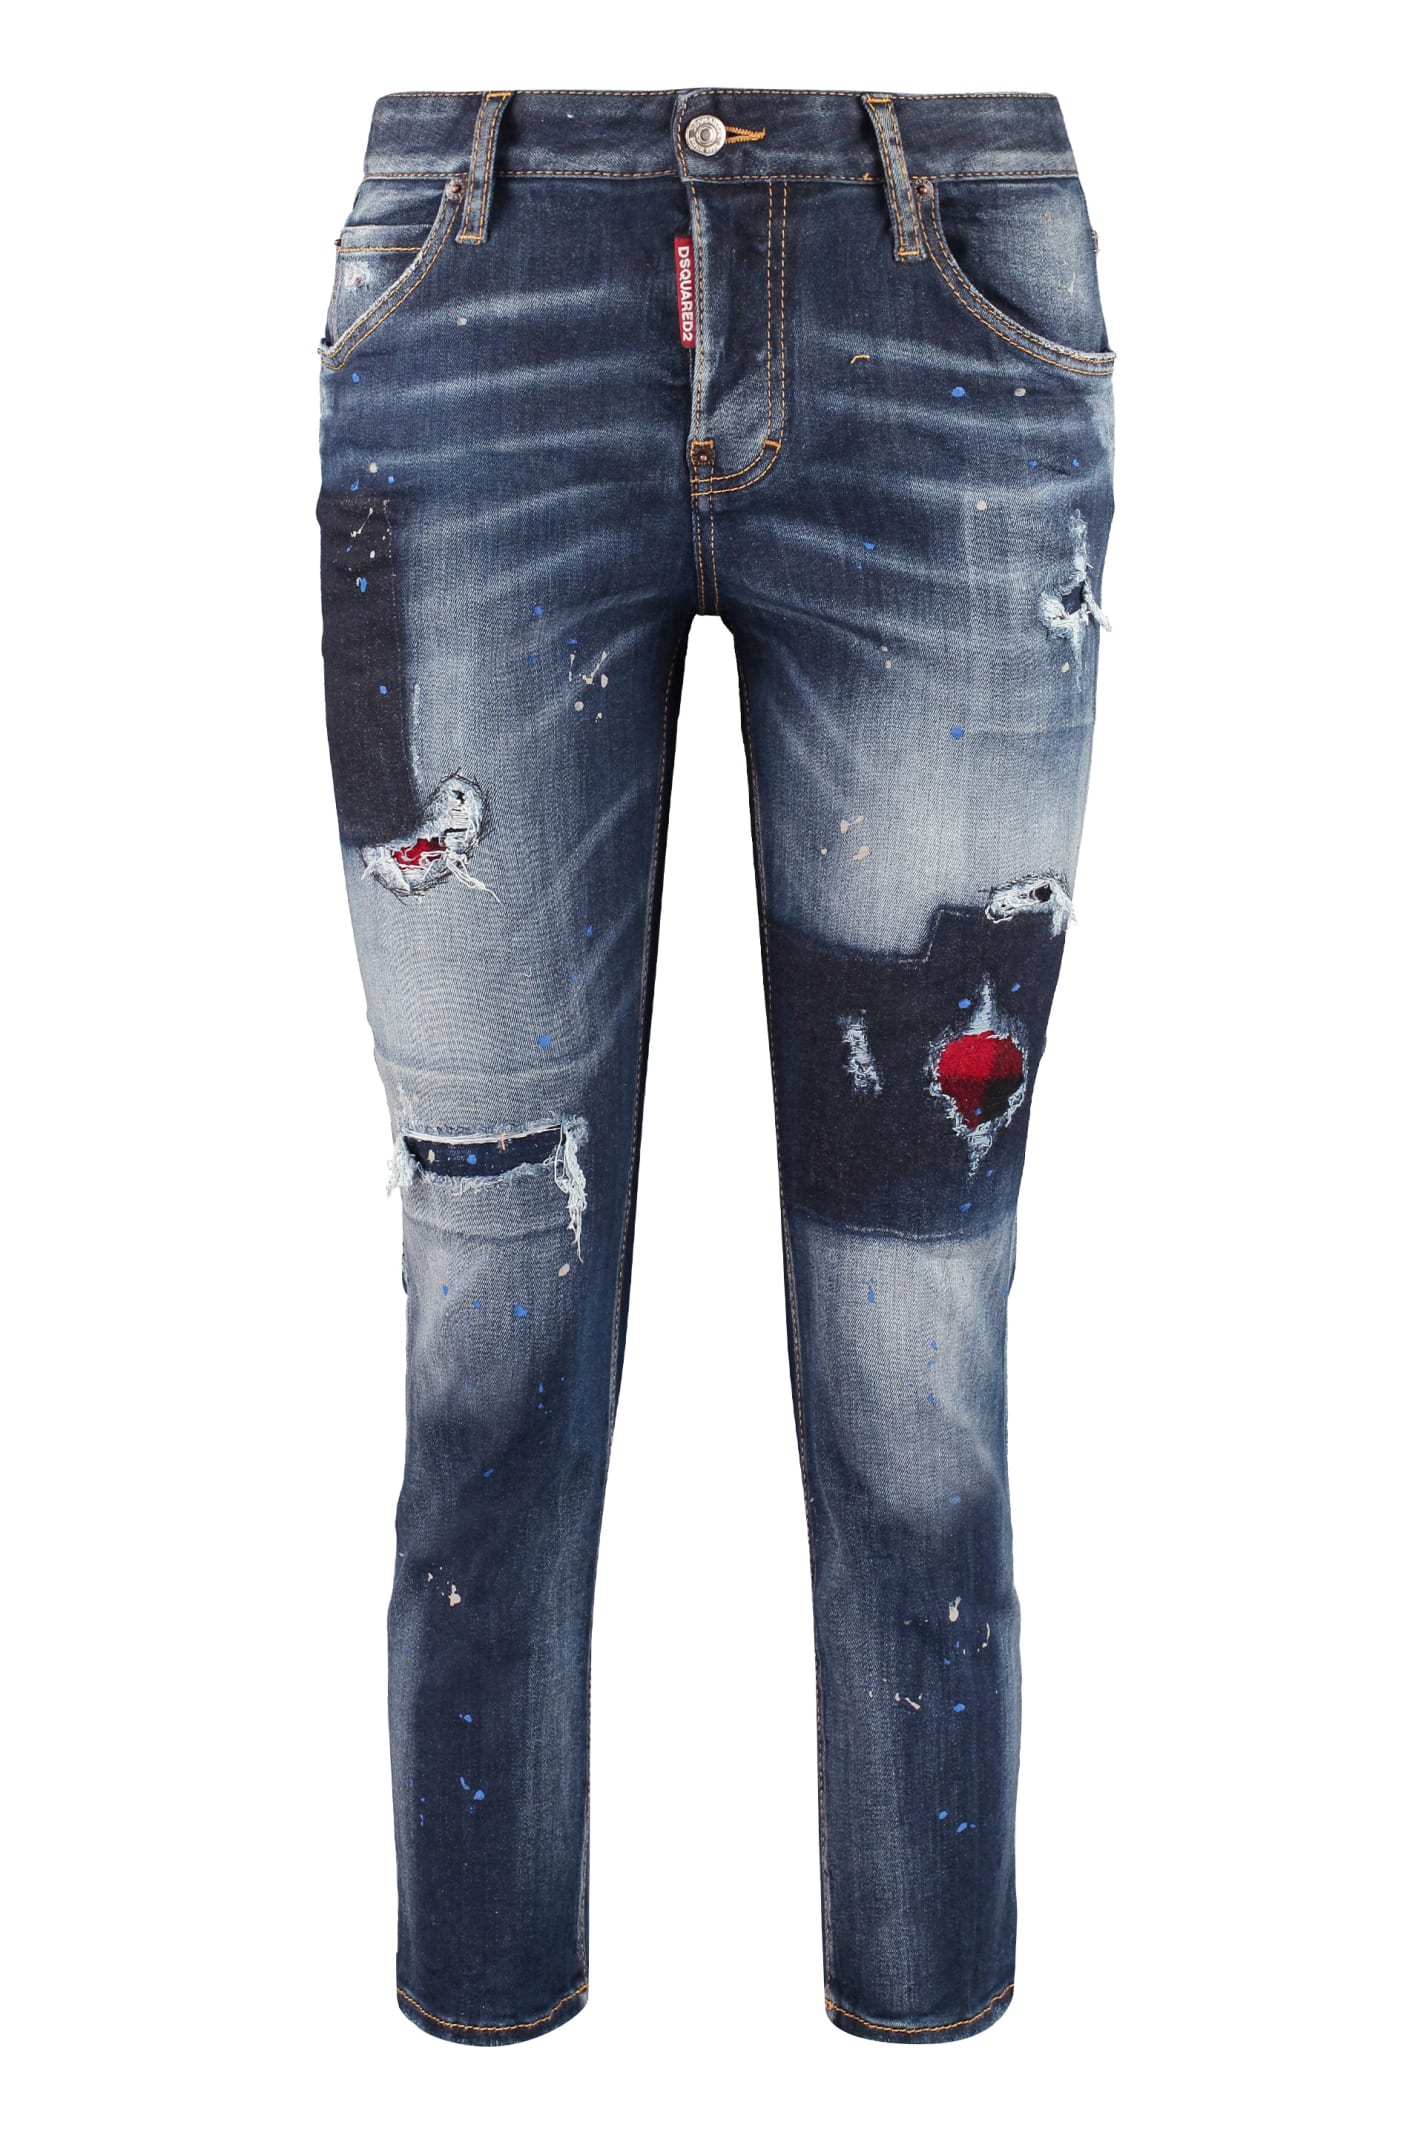 Dsquared2 Cool Girl Worn-out Details Jeans